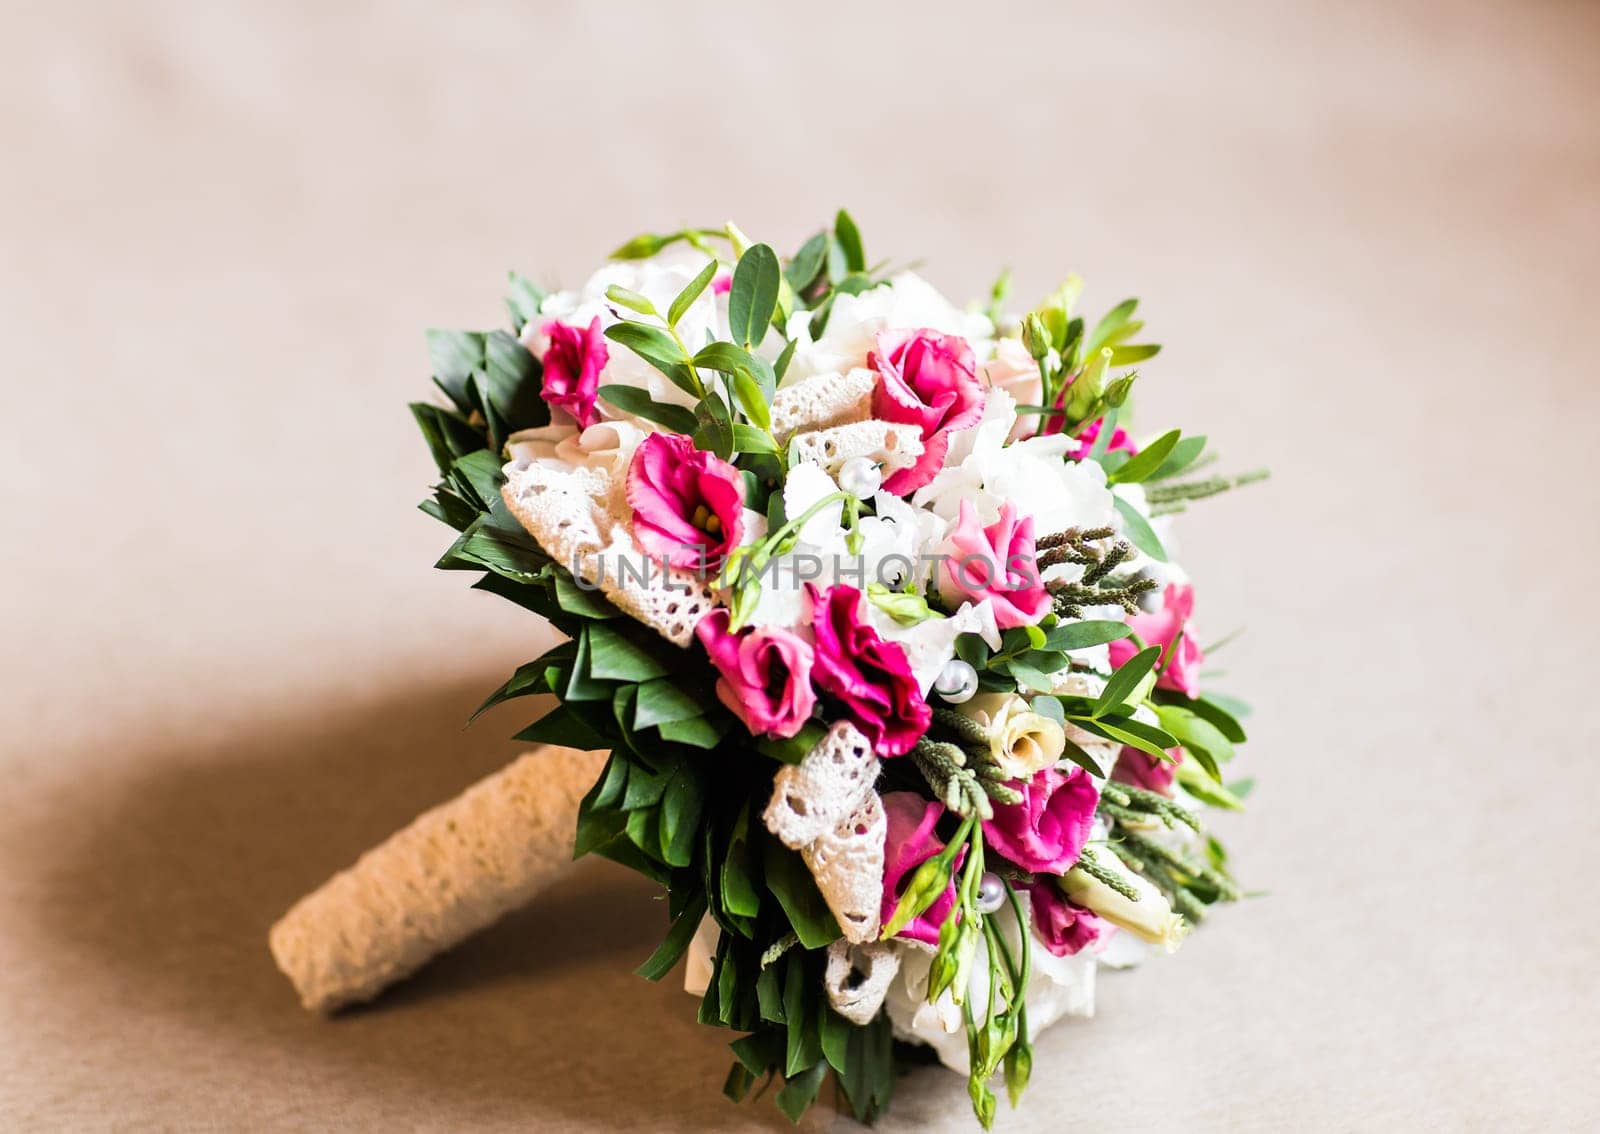 Wedding bouquet close-up by Satura86